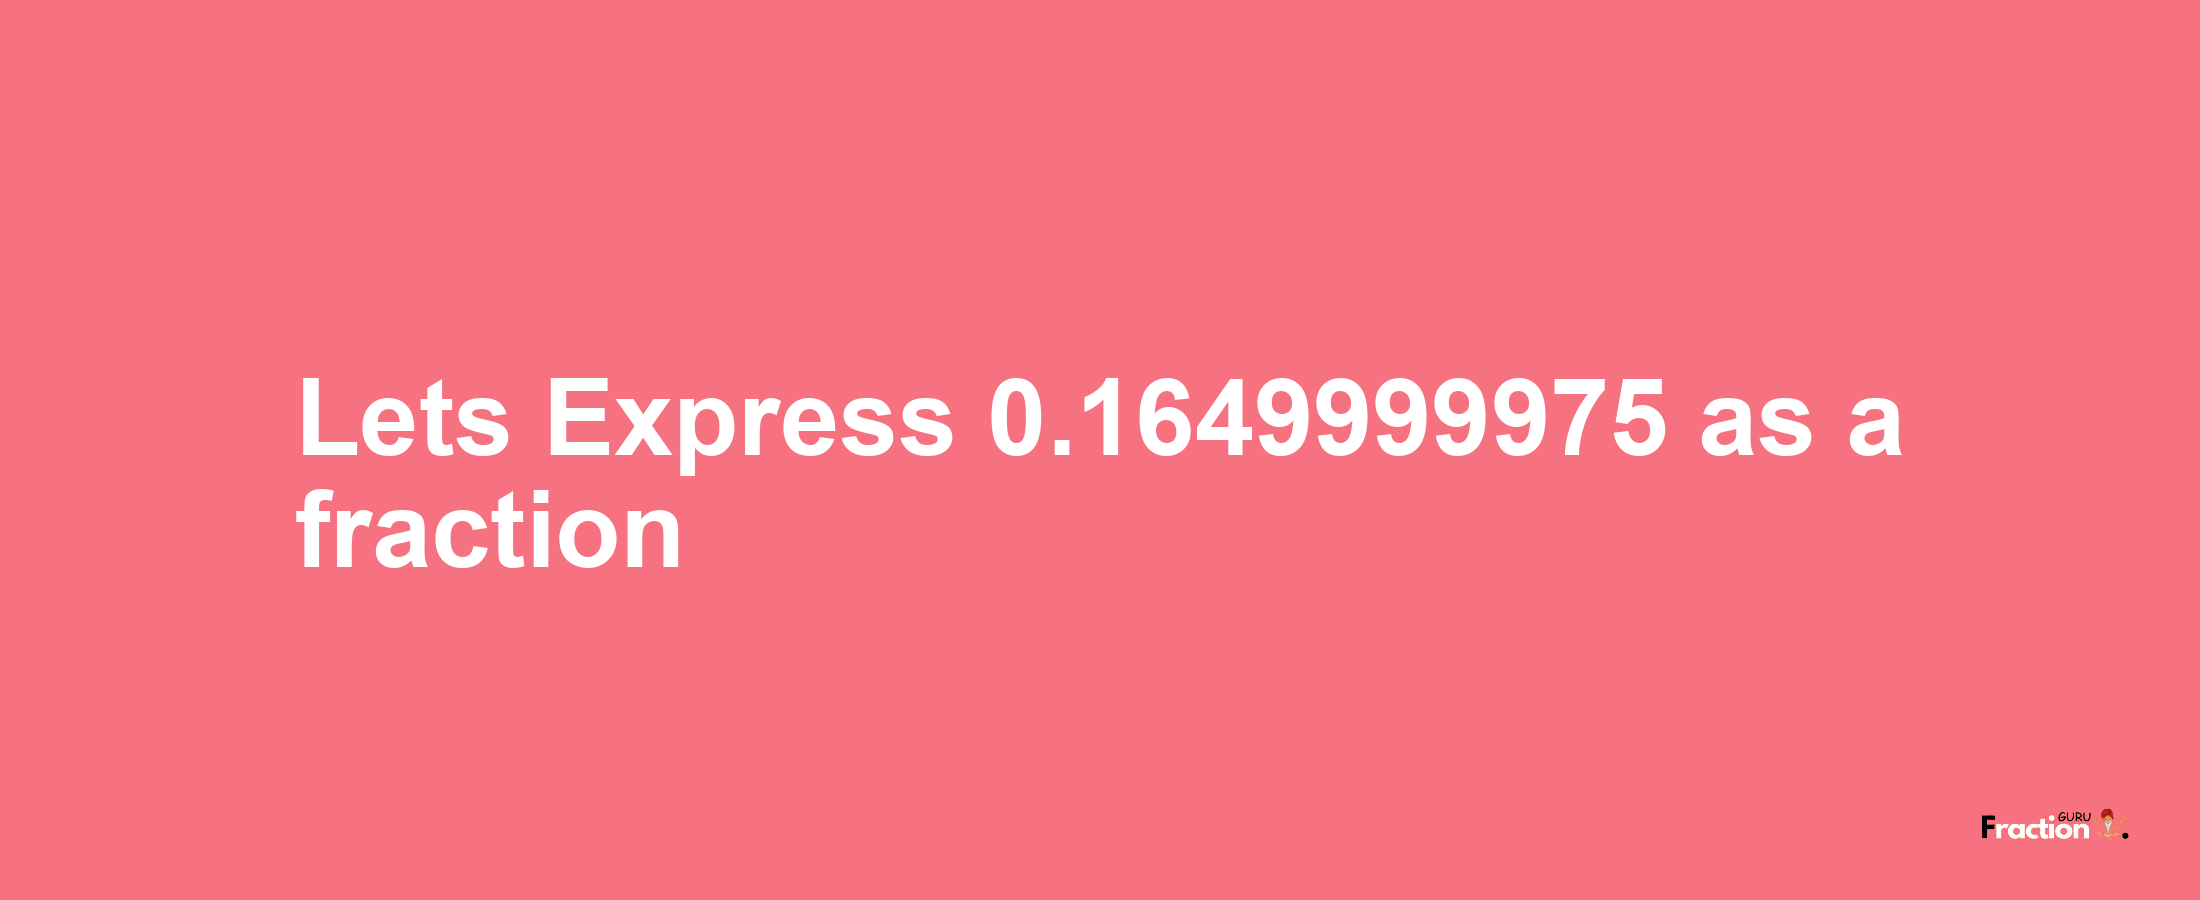 Lets Express 0.1649999975 as afraction